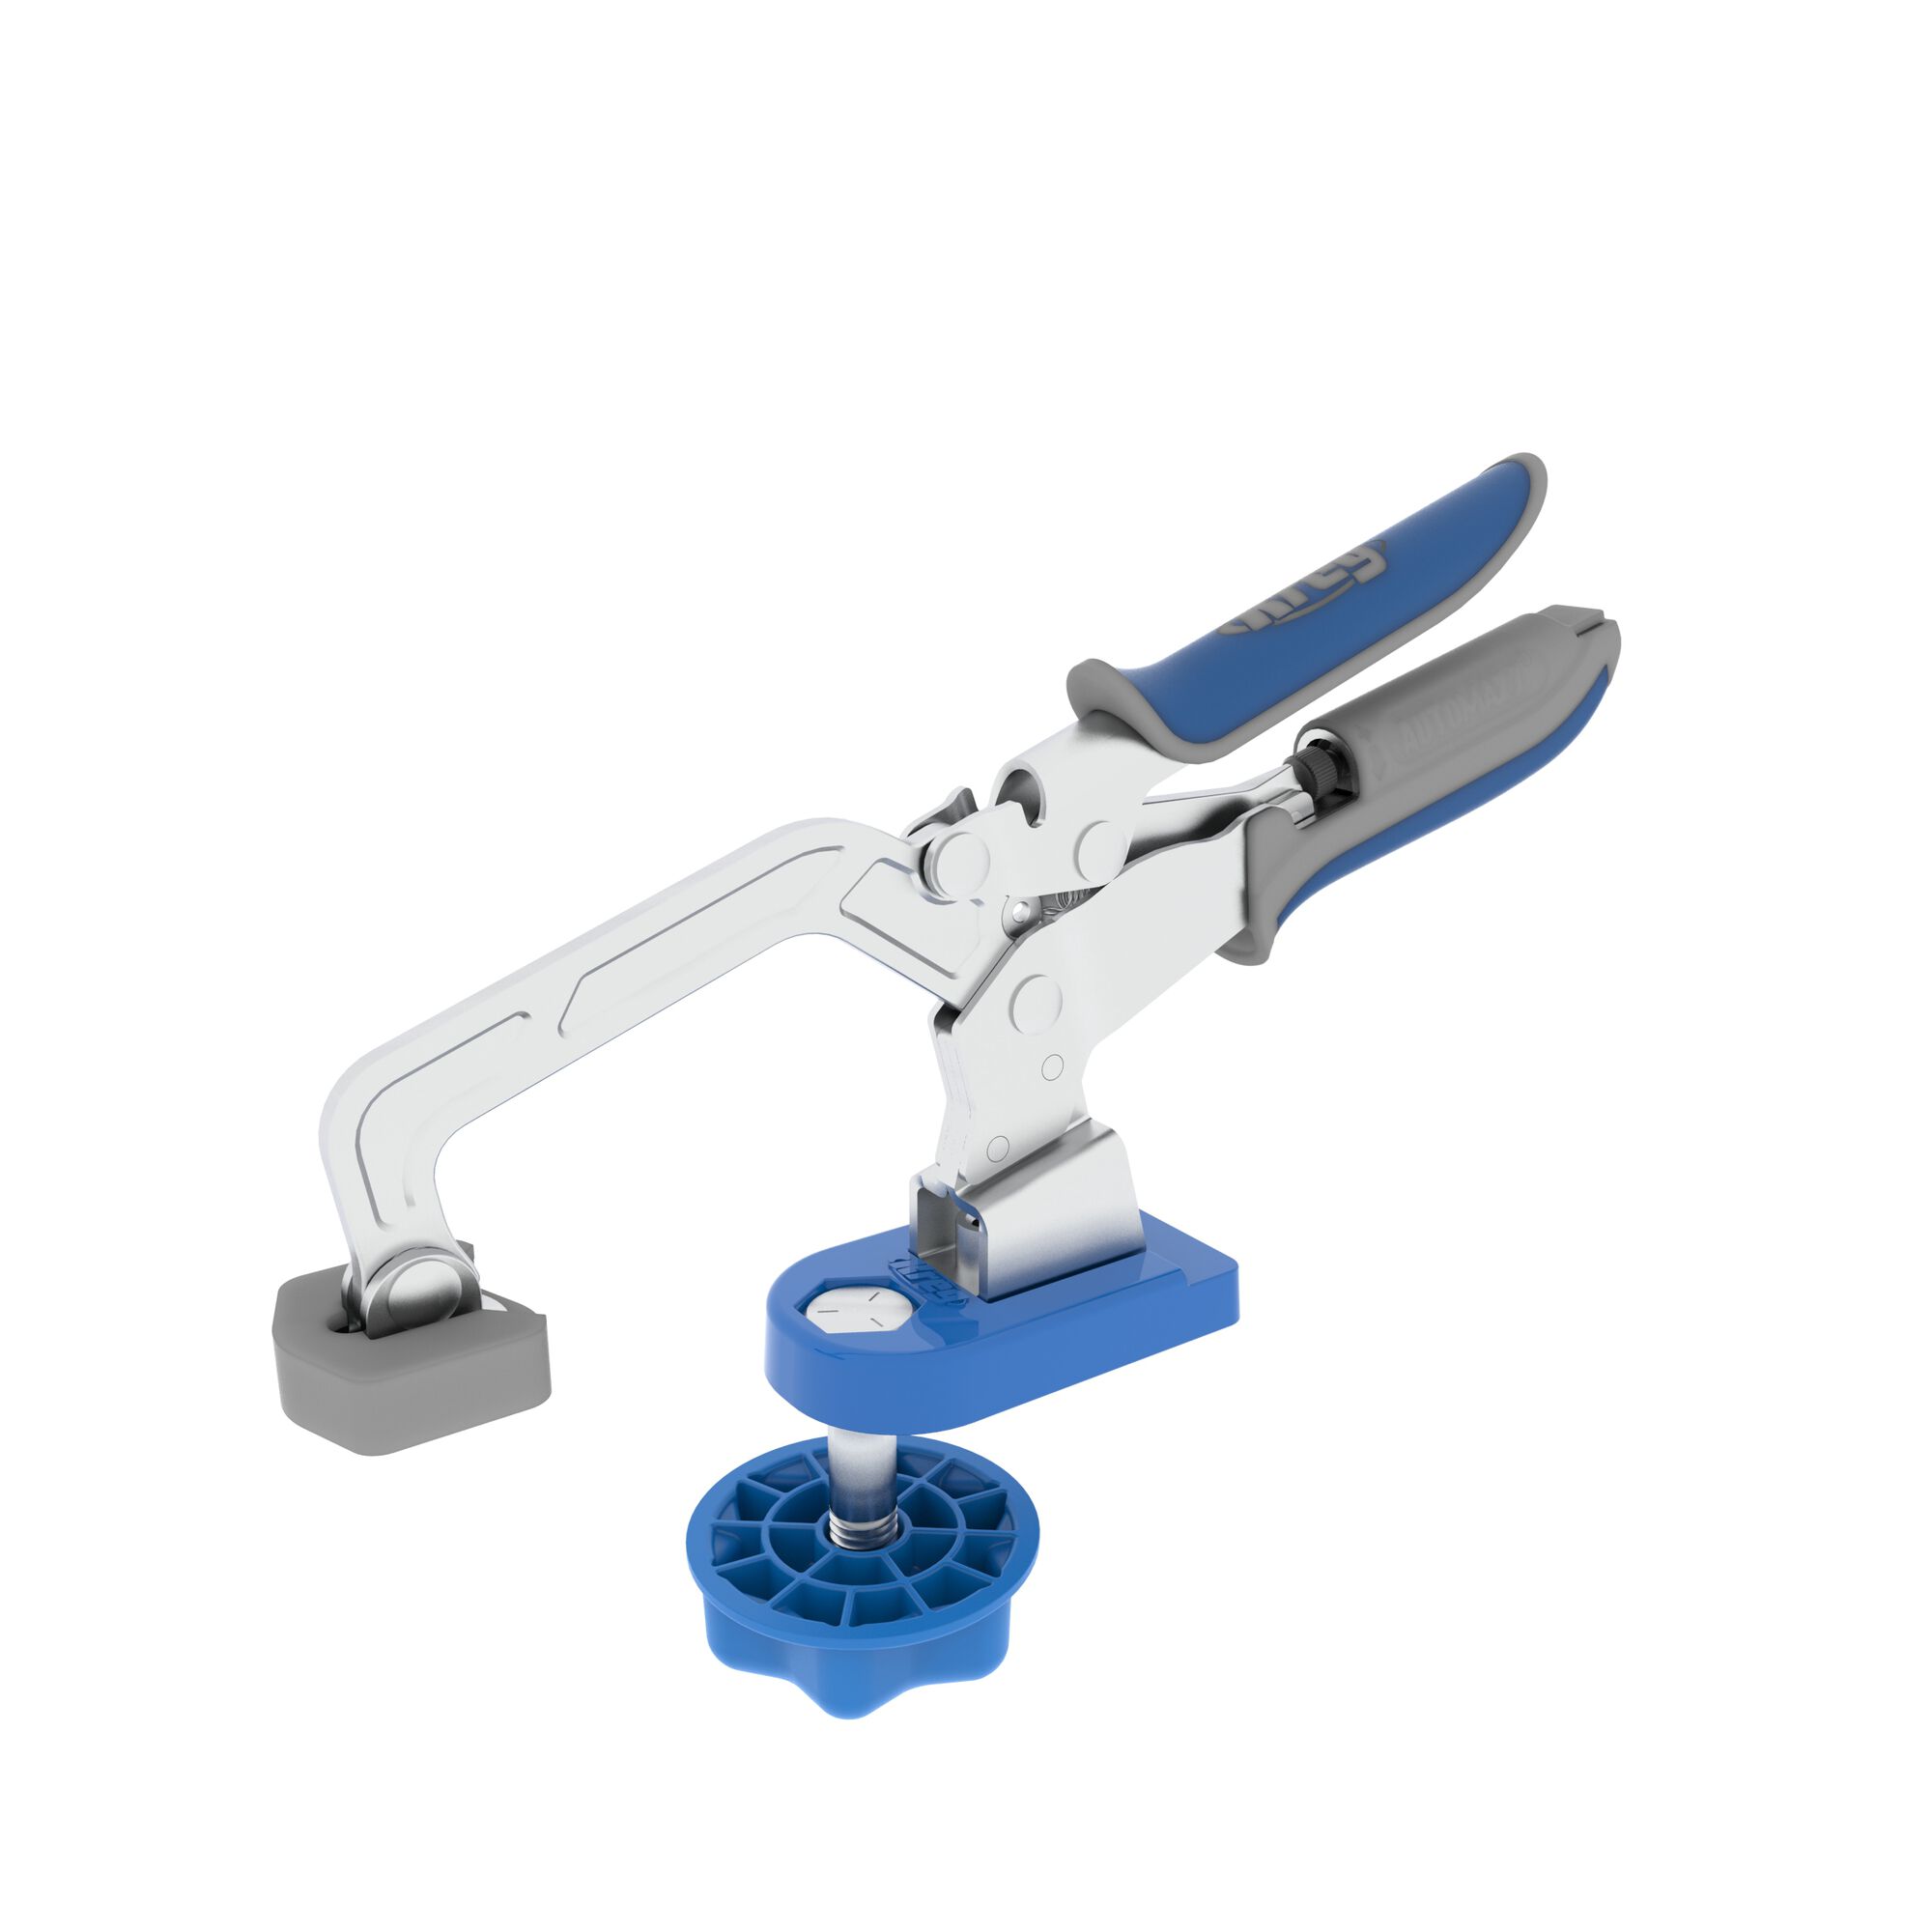 Details about  / KREG 3-inch Heavy-Duty Automaxx Bench Clamp System KBC3-HDSYS